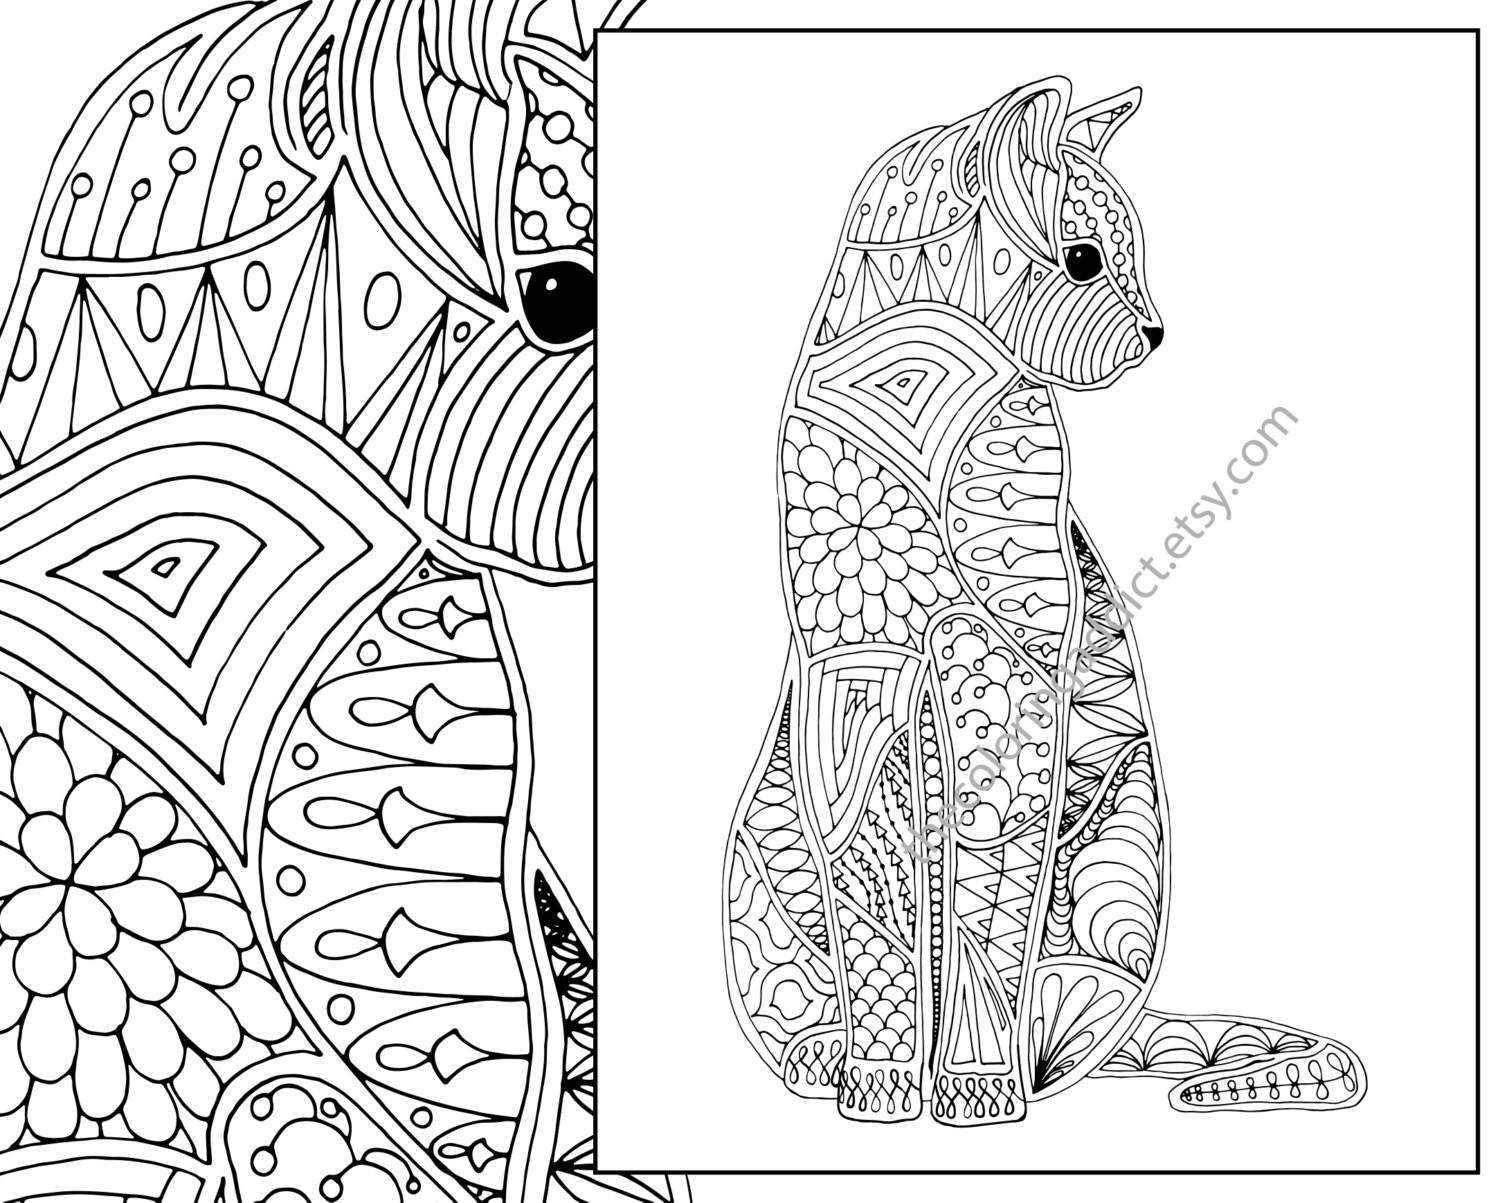 Cat Adult Coloring Pages
 cat coloring page advanced coloring page adult coloring